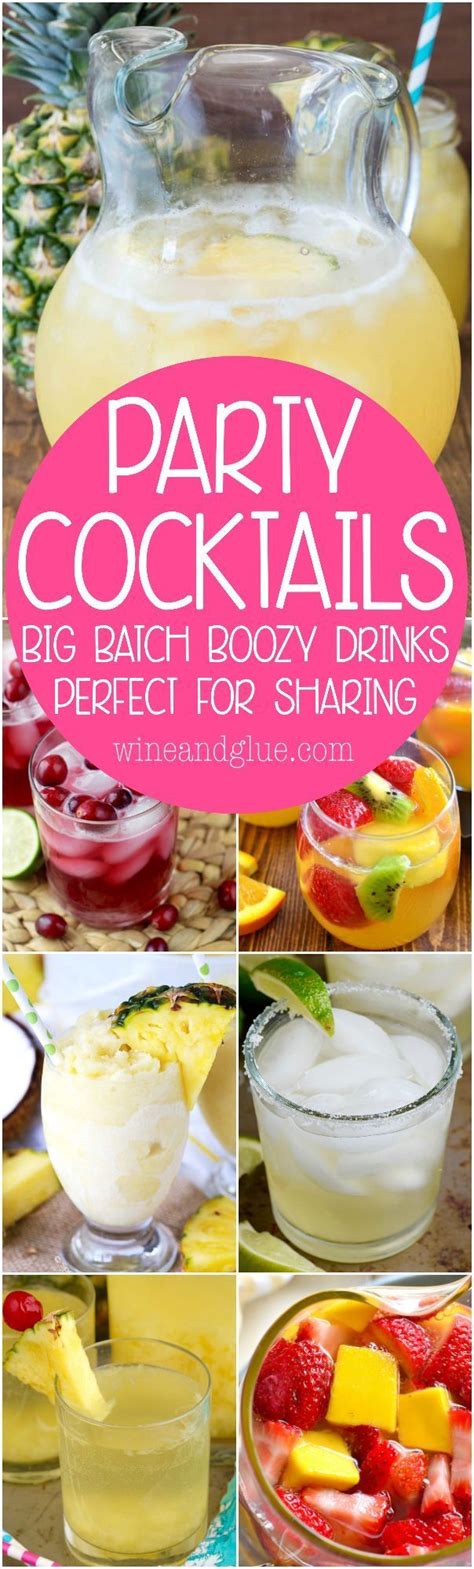 These Party Cocktails Are Perfect For Making For A Crowd They Make A Big Pitchers Worth Or Mo